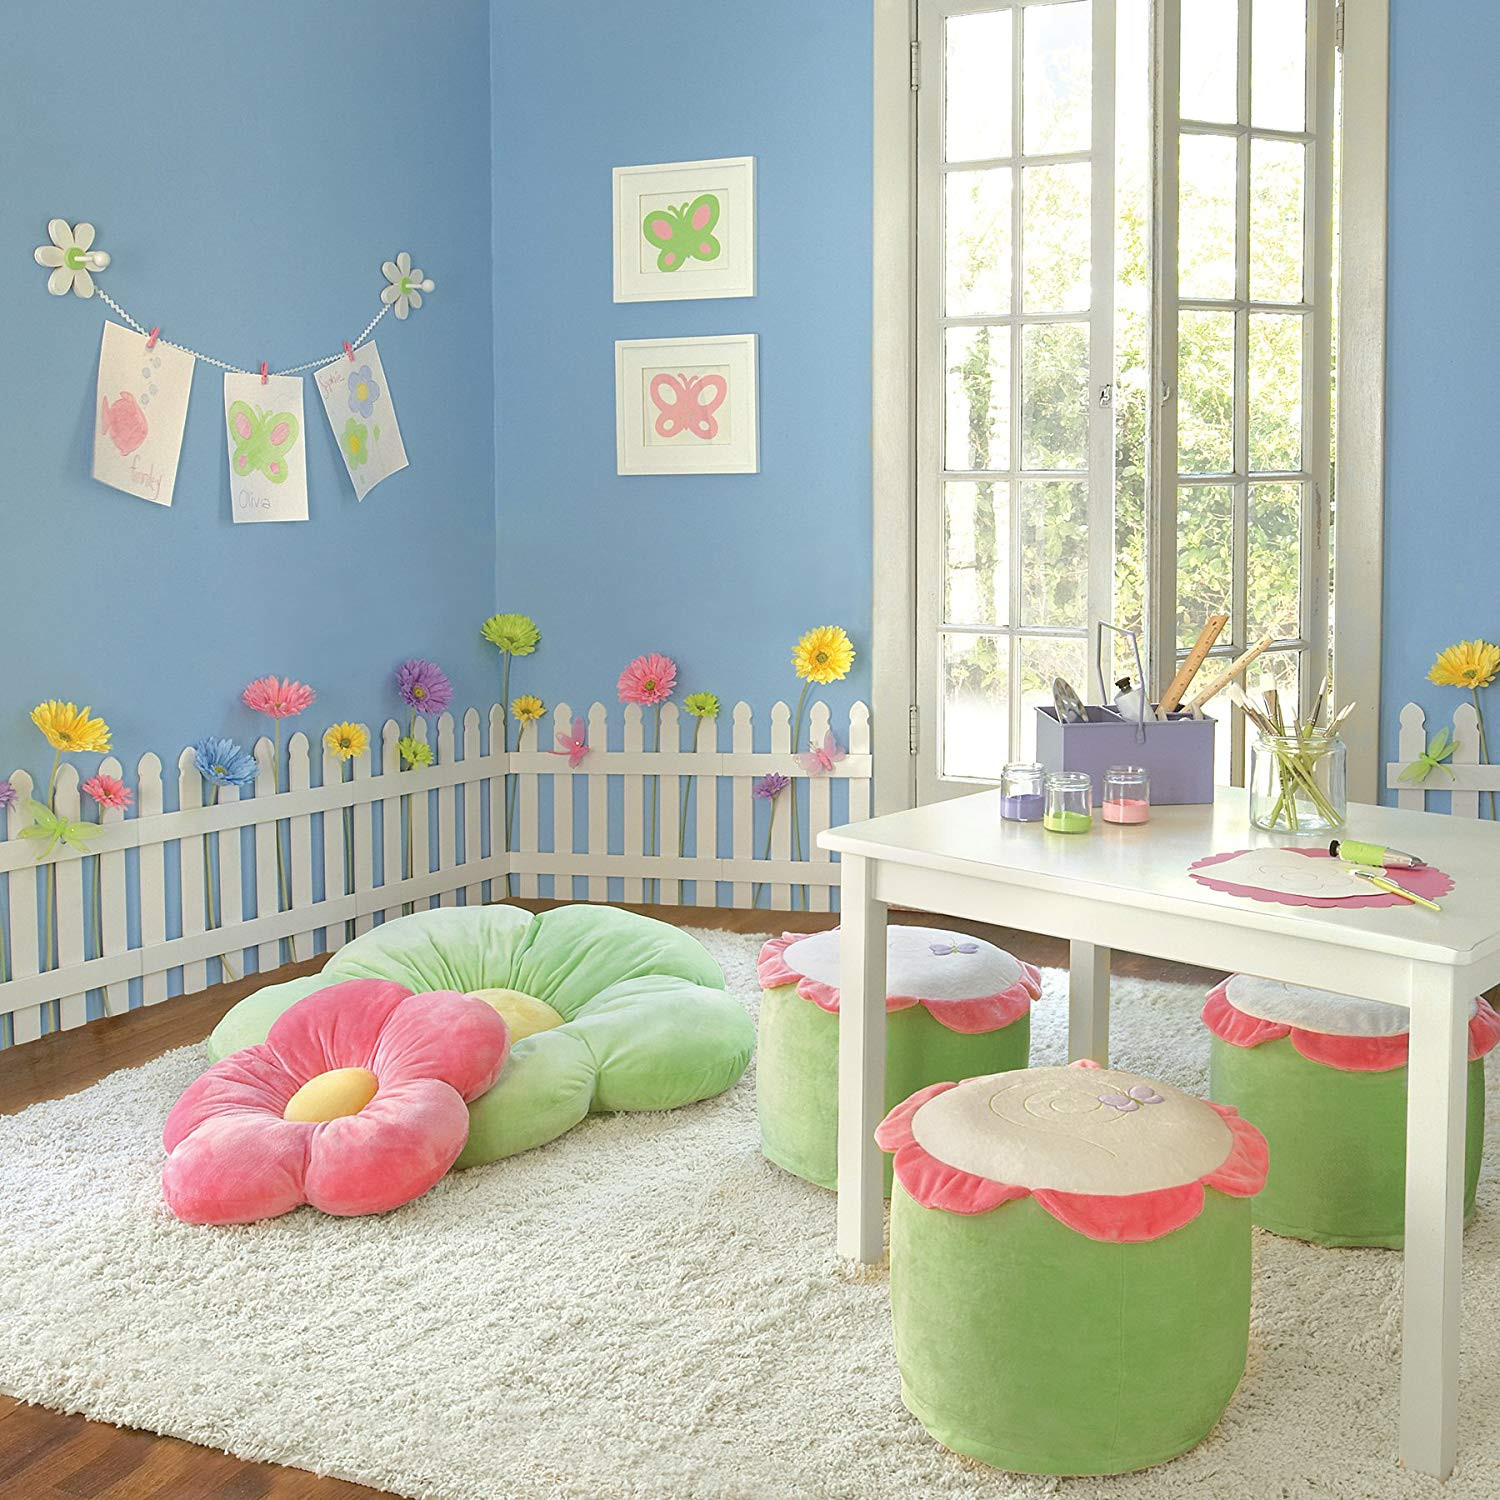 Wall Borders For Kids Room
 White Wooden Picket Fences for Kids Room Wall Border